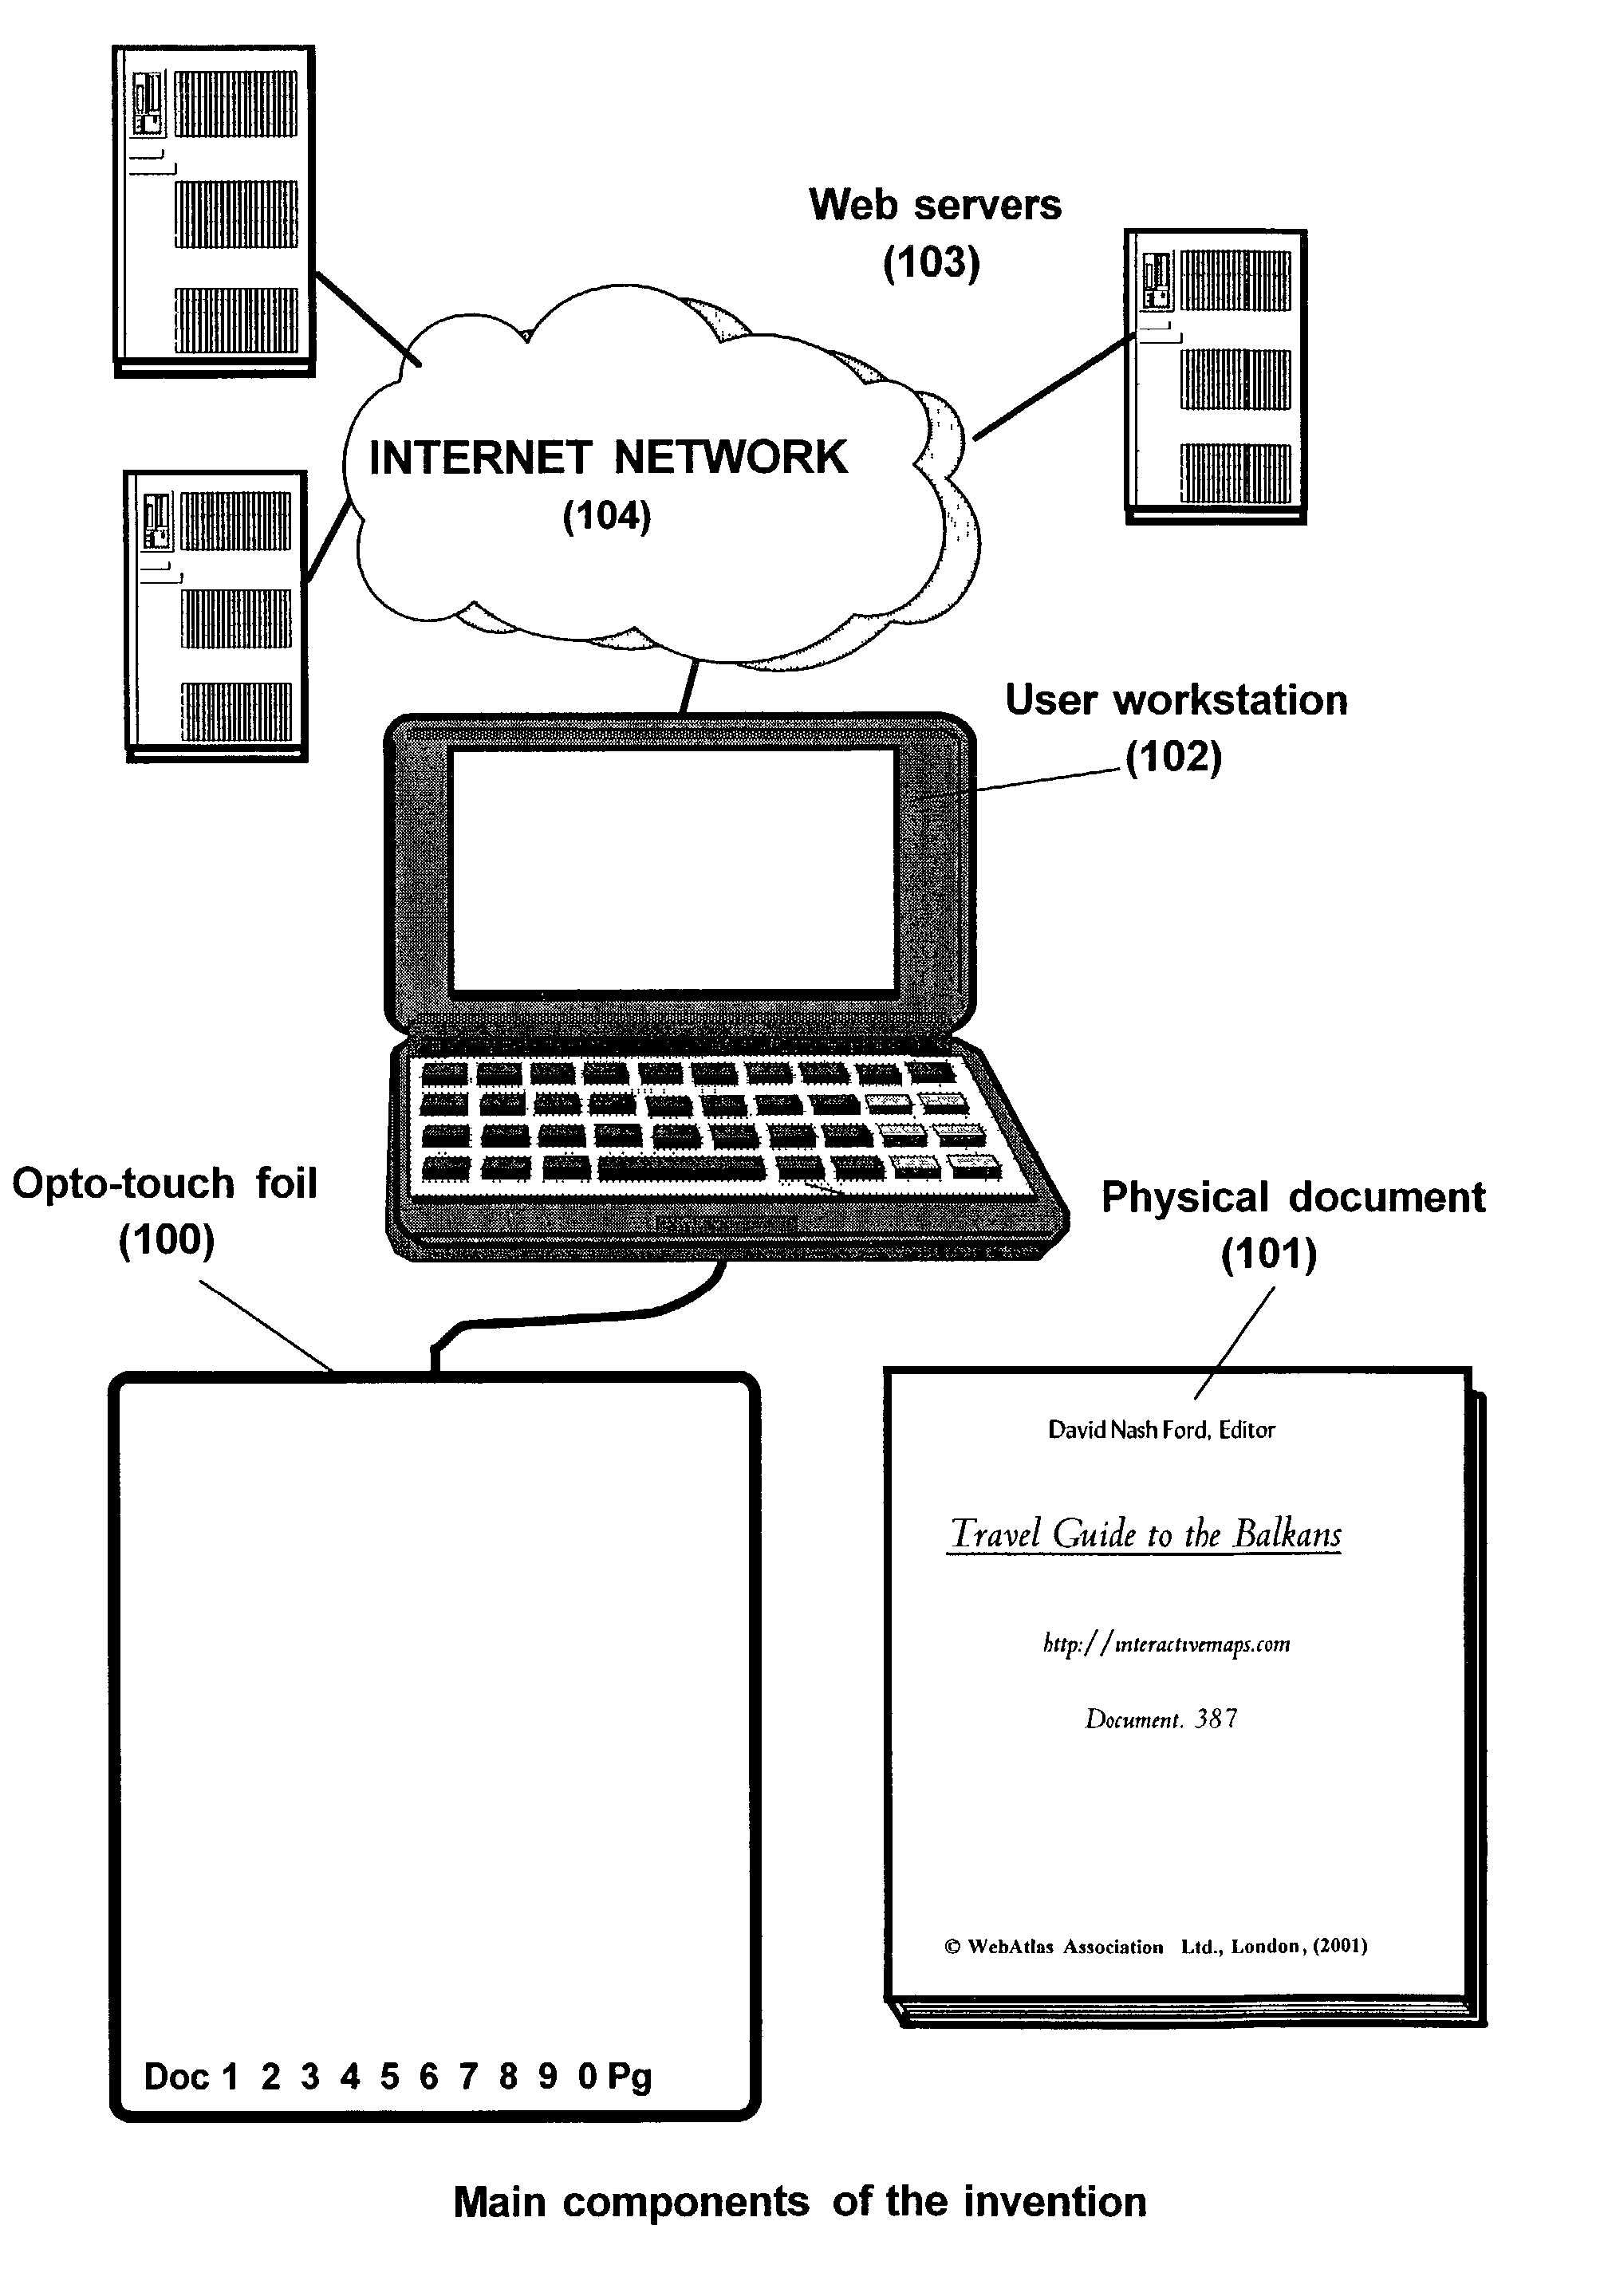 System and method for locating on electronic documents items referenced in a physical document